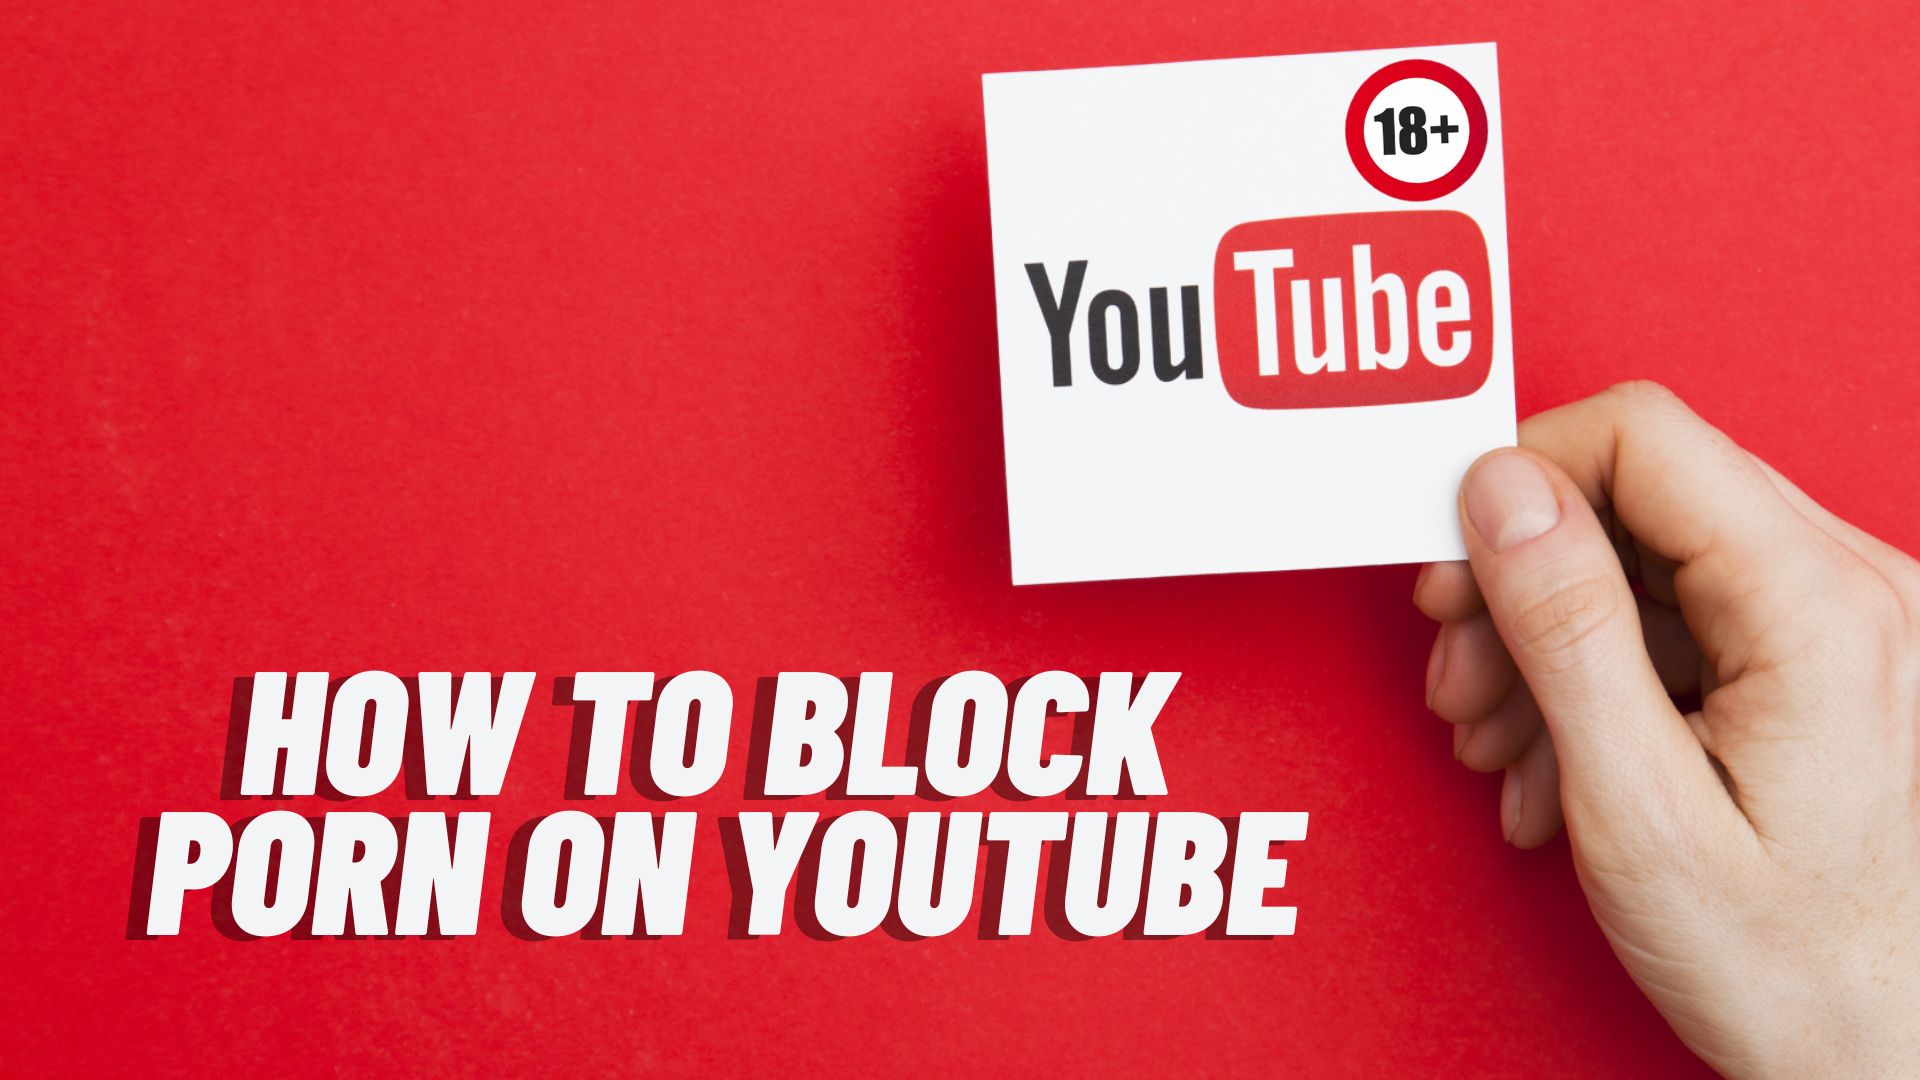 How-to-Block-Porn-on-YouTube.jpg